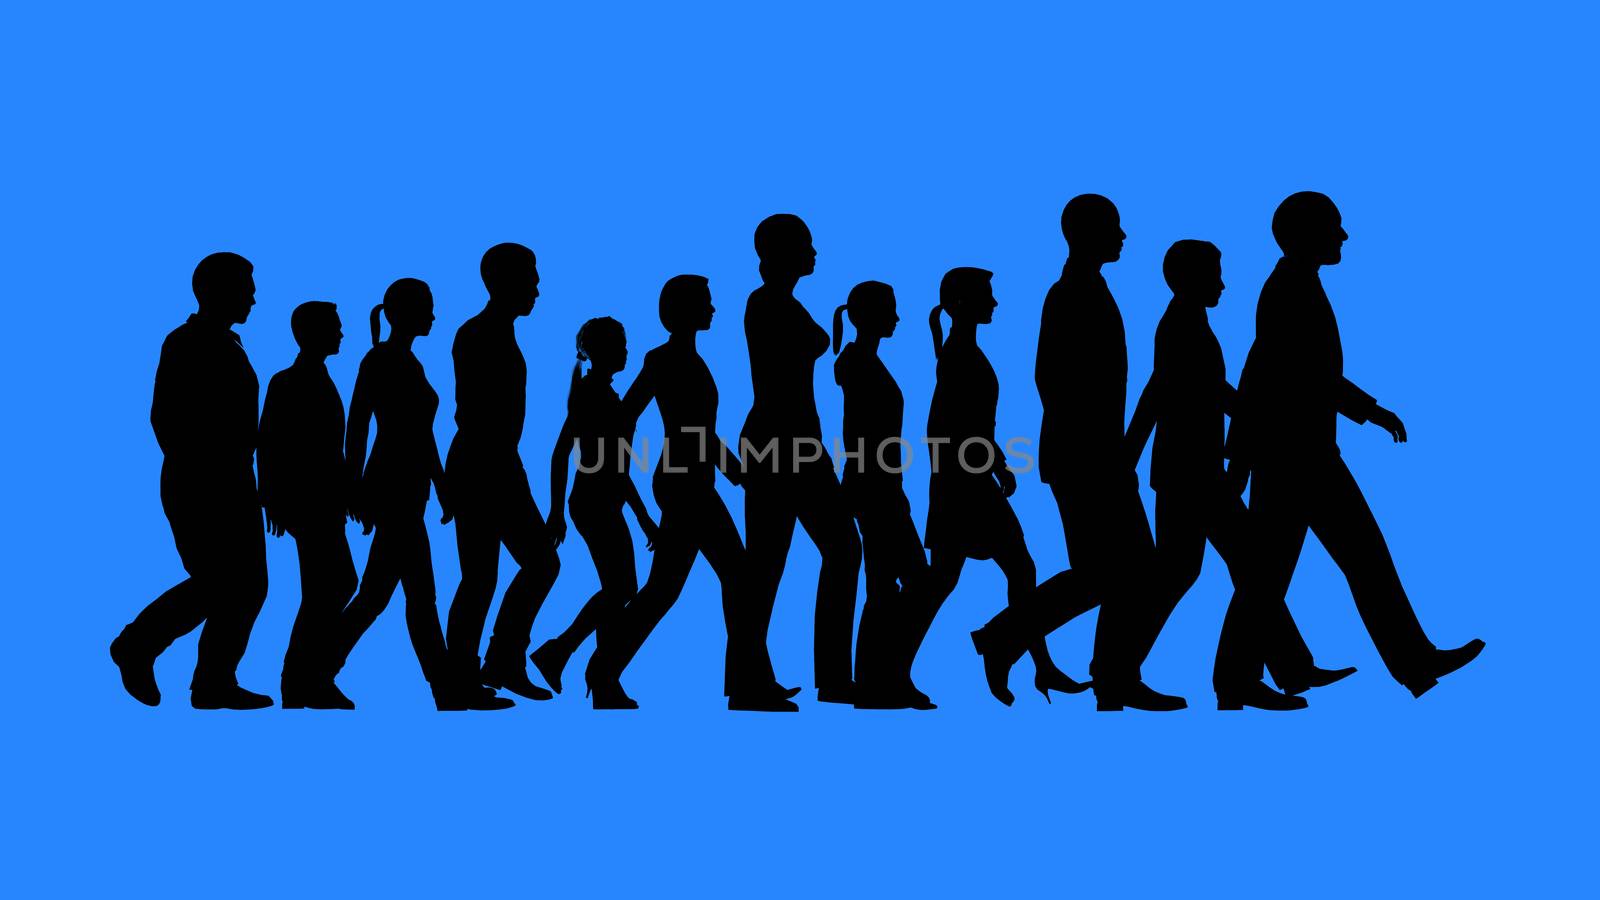 Group of people walking silhouettes isolated on blue background. Team work concept.